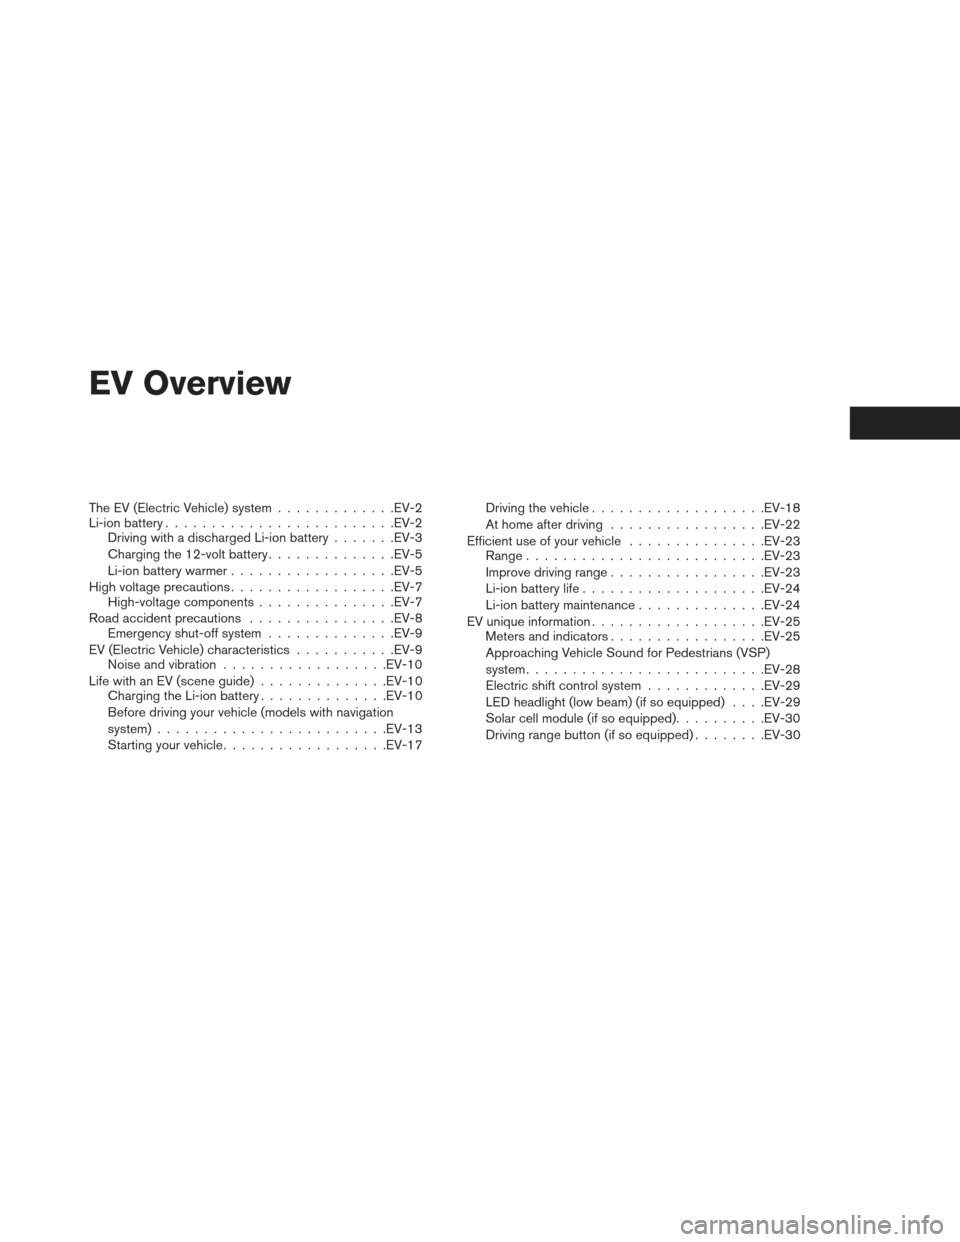 NISSAN LEAF 2013 1.G Owners Manual EV Overview
The EV (Electric Vehicle) system.............EV-2
Li-ion battery ........................ .EV-2
Driving with a discharged Li-ion battery .......EV-3
Charging the 12-volt battery ..........